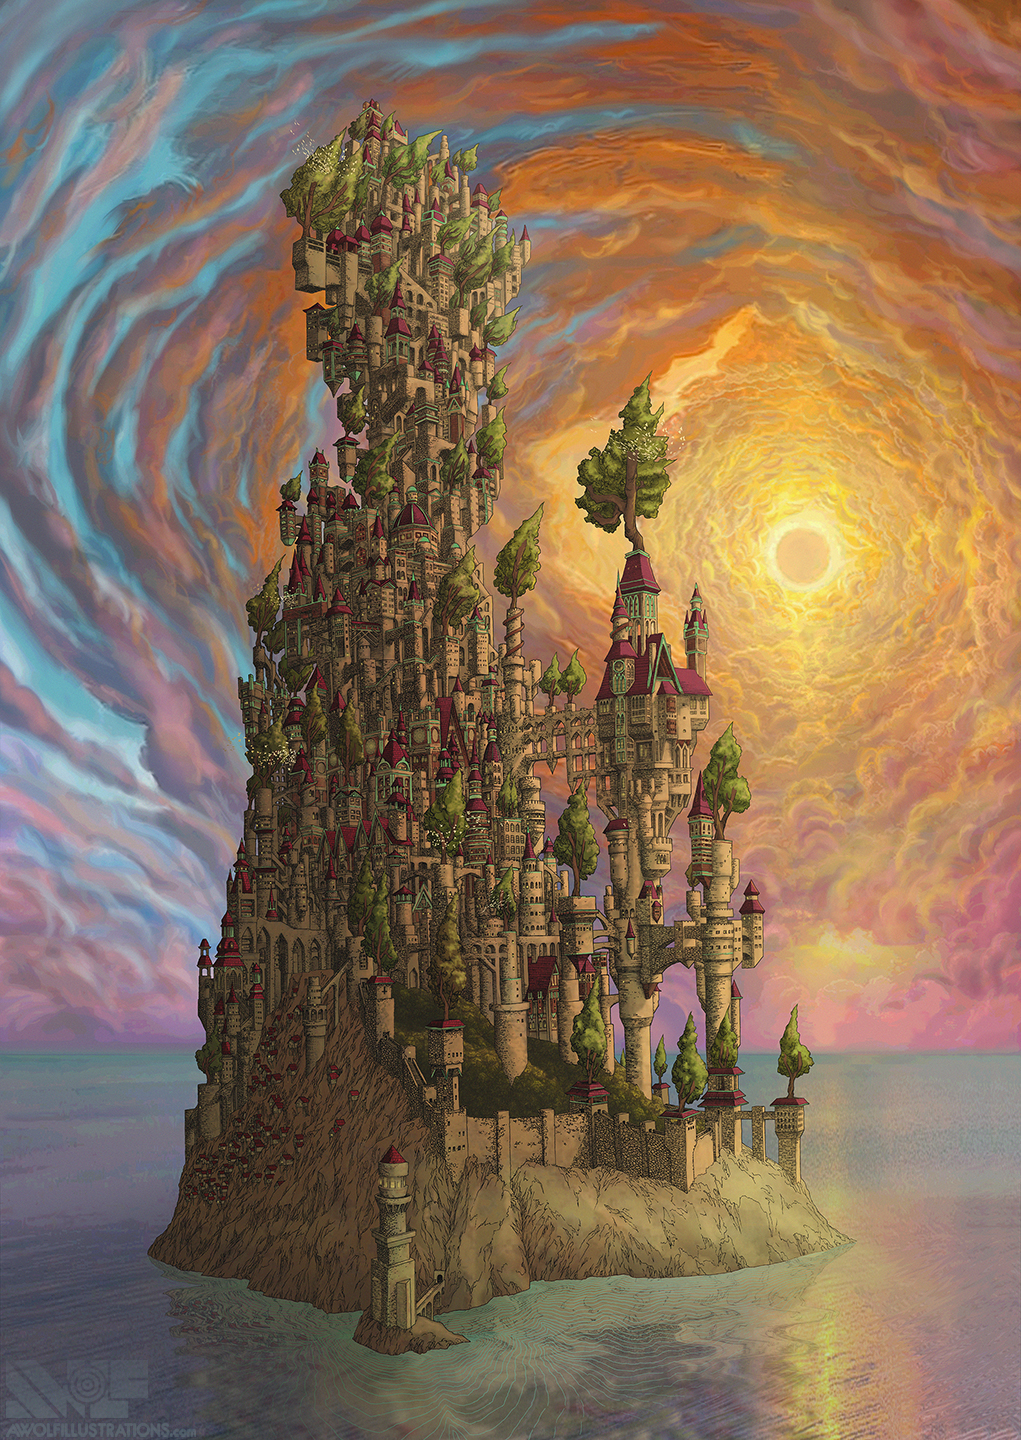 A digital illustration of a castle on an island in the middle of the ocean infront of a beautiful sunset